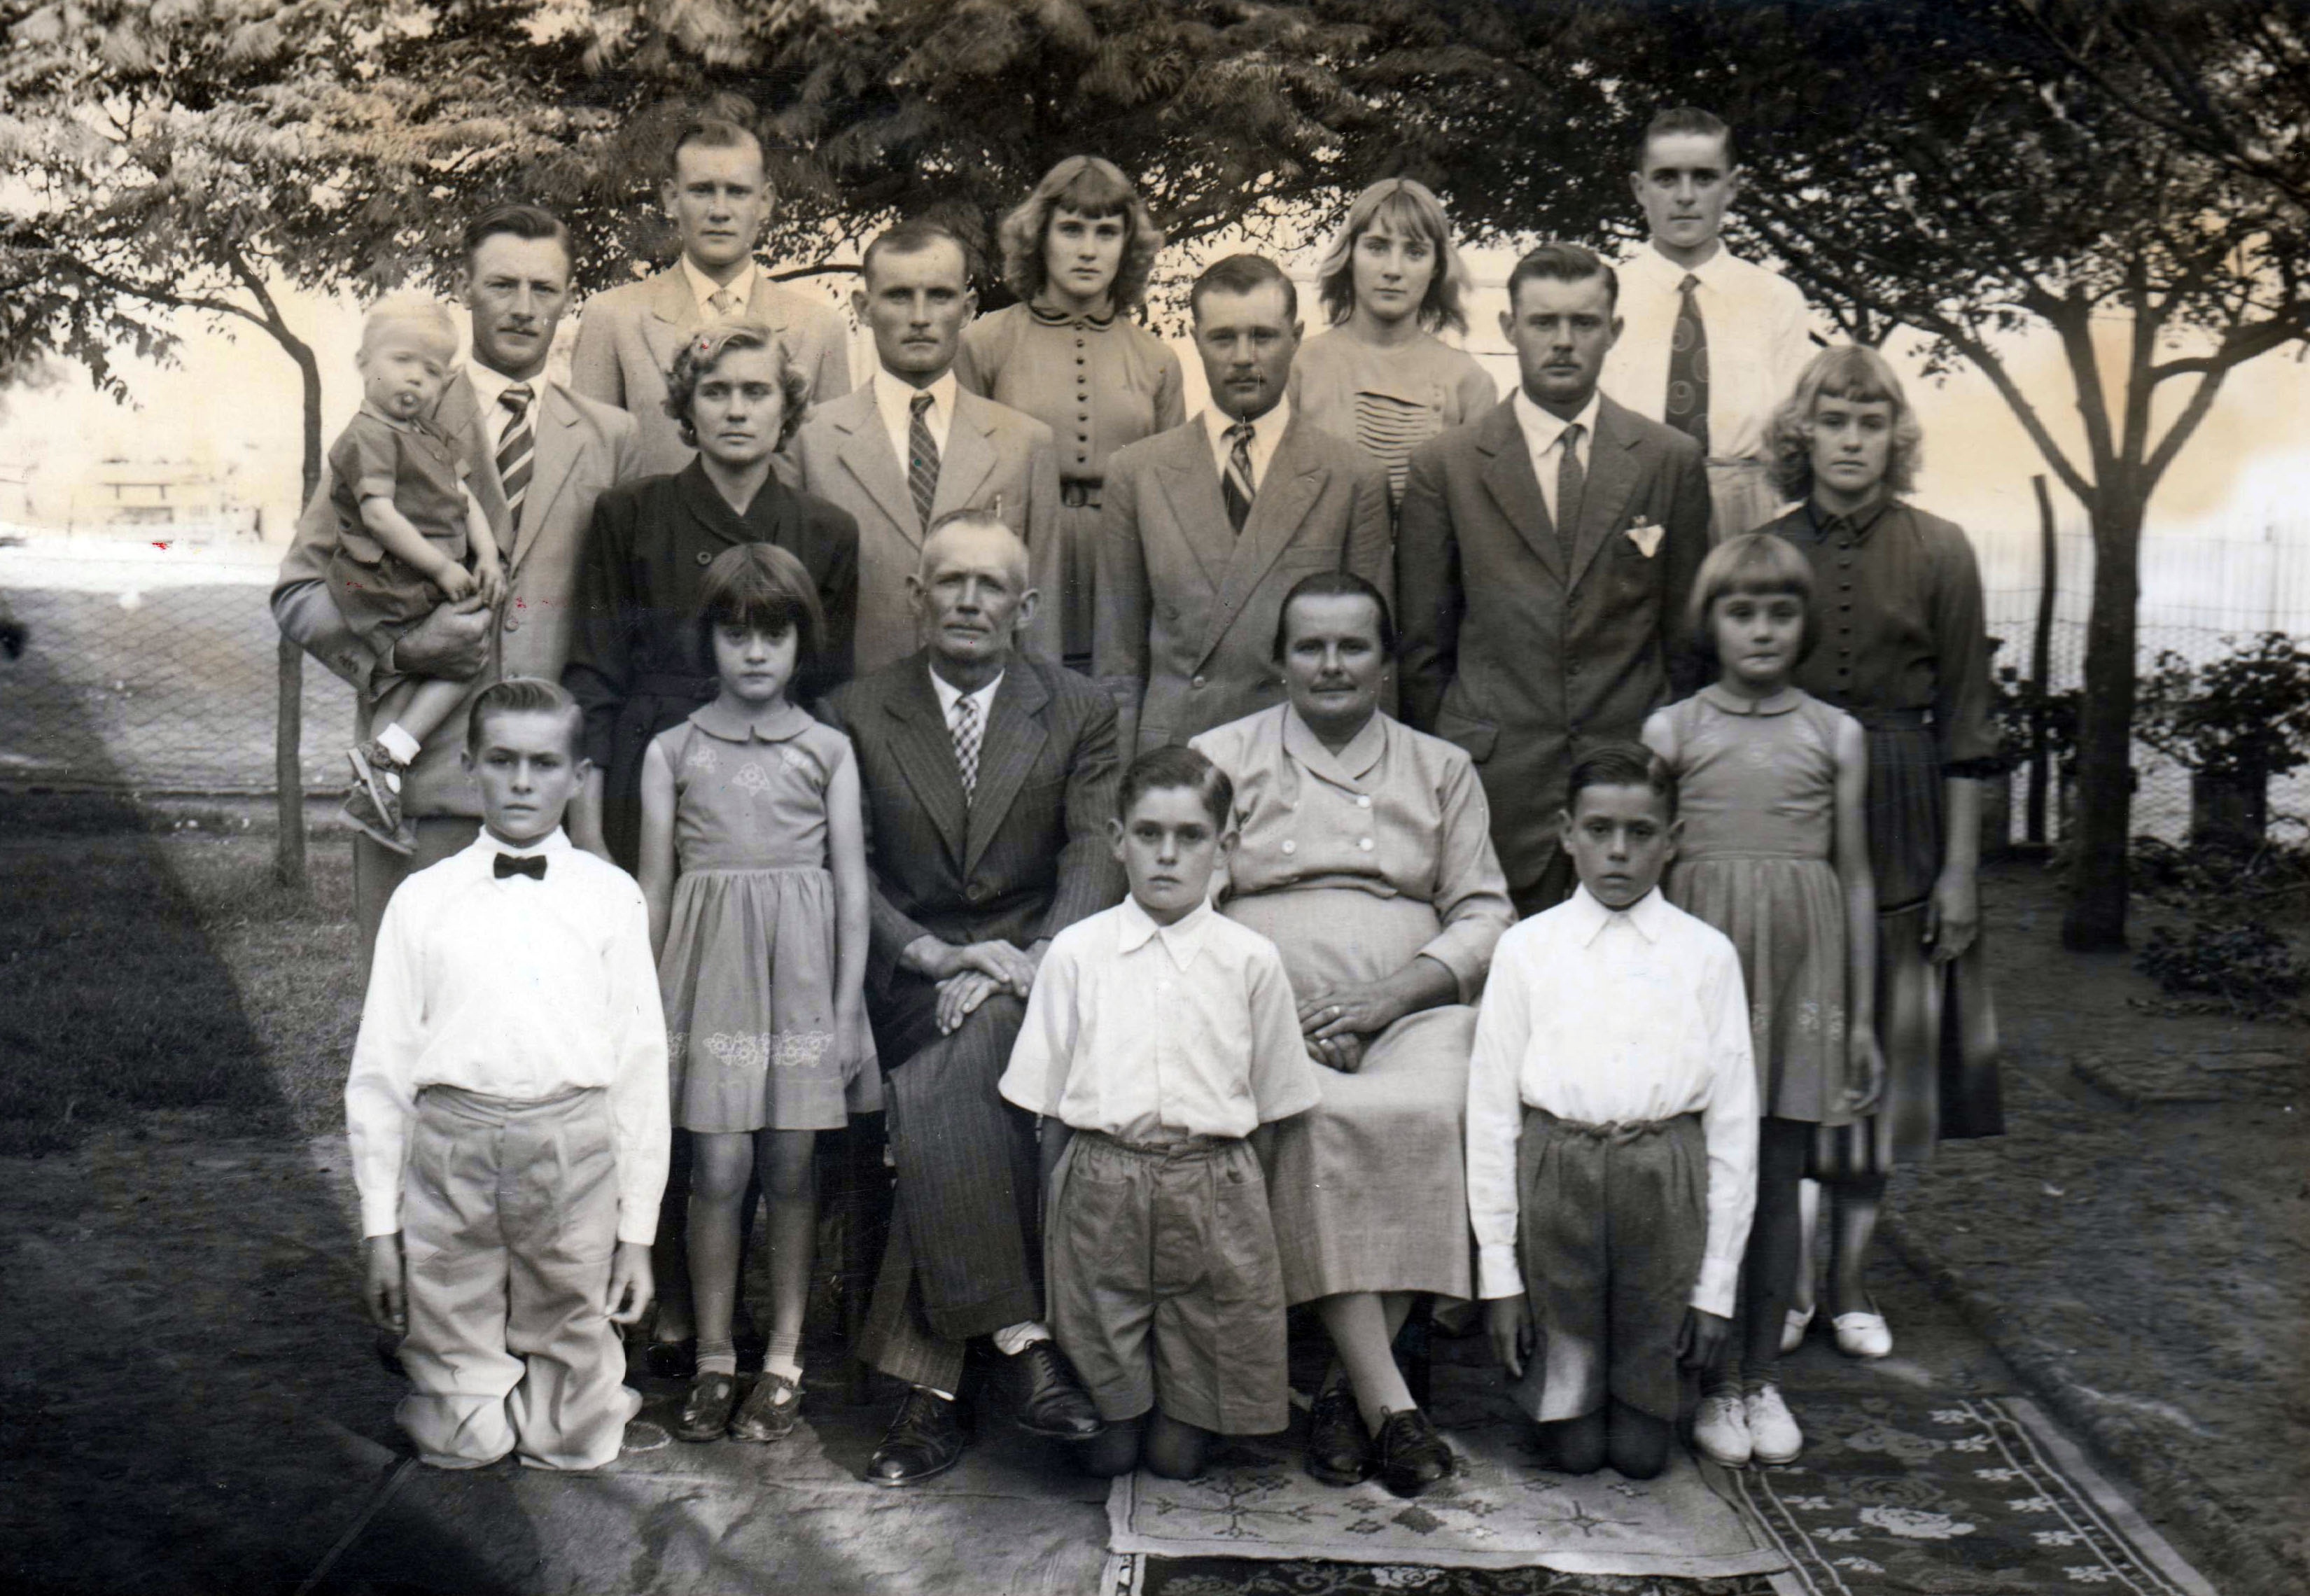 The Hildt Family of Gilbert. Source: Leandro Hildt.